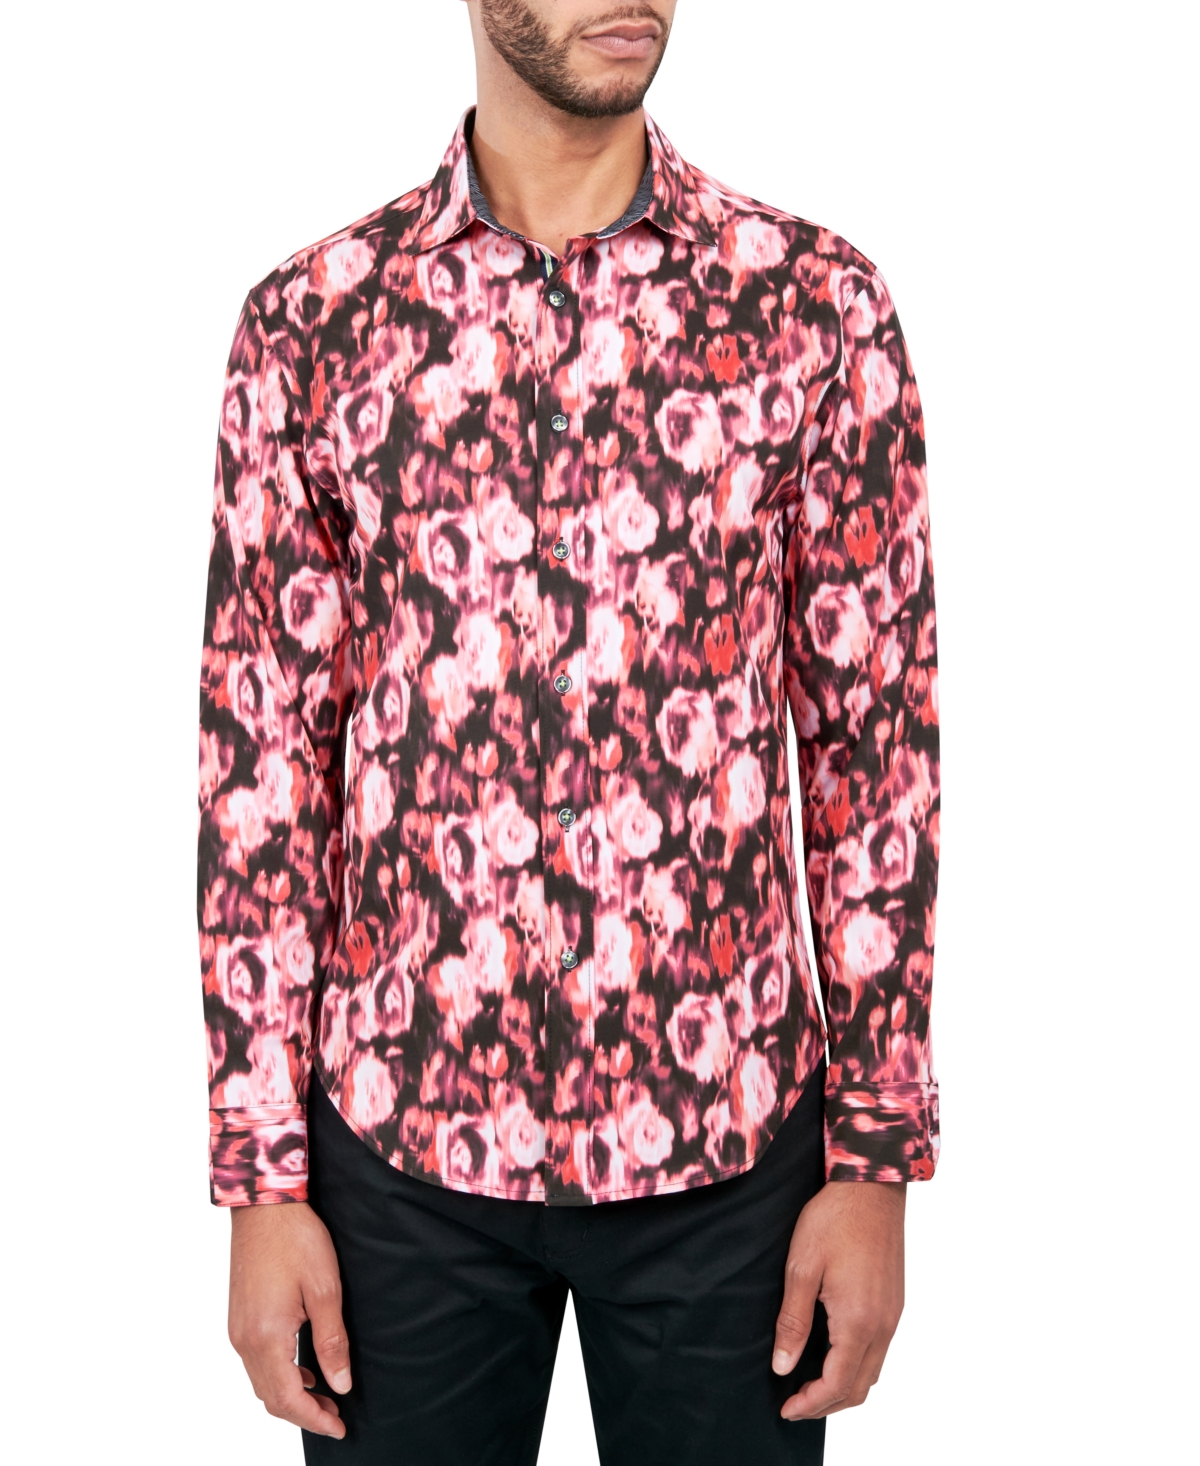 Men's Regular-Fit Non-Iron Performance Stretch Abstract Floral Button-Down Shirt - Red